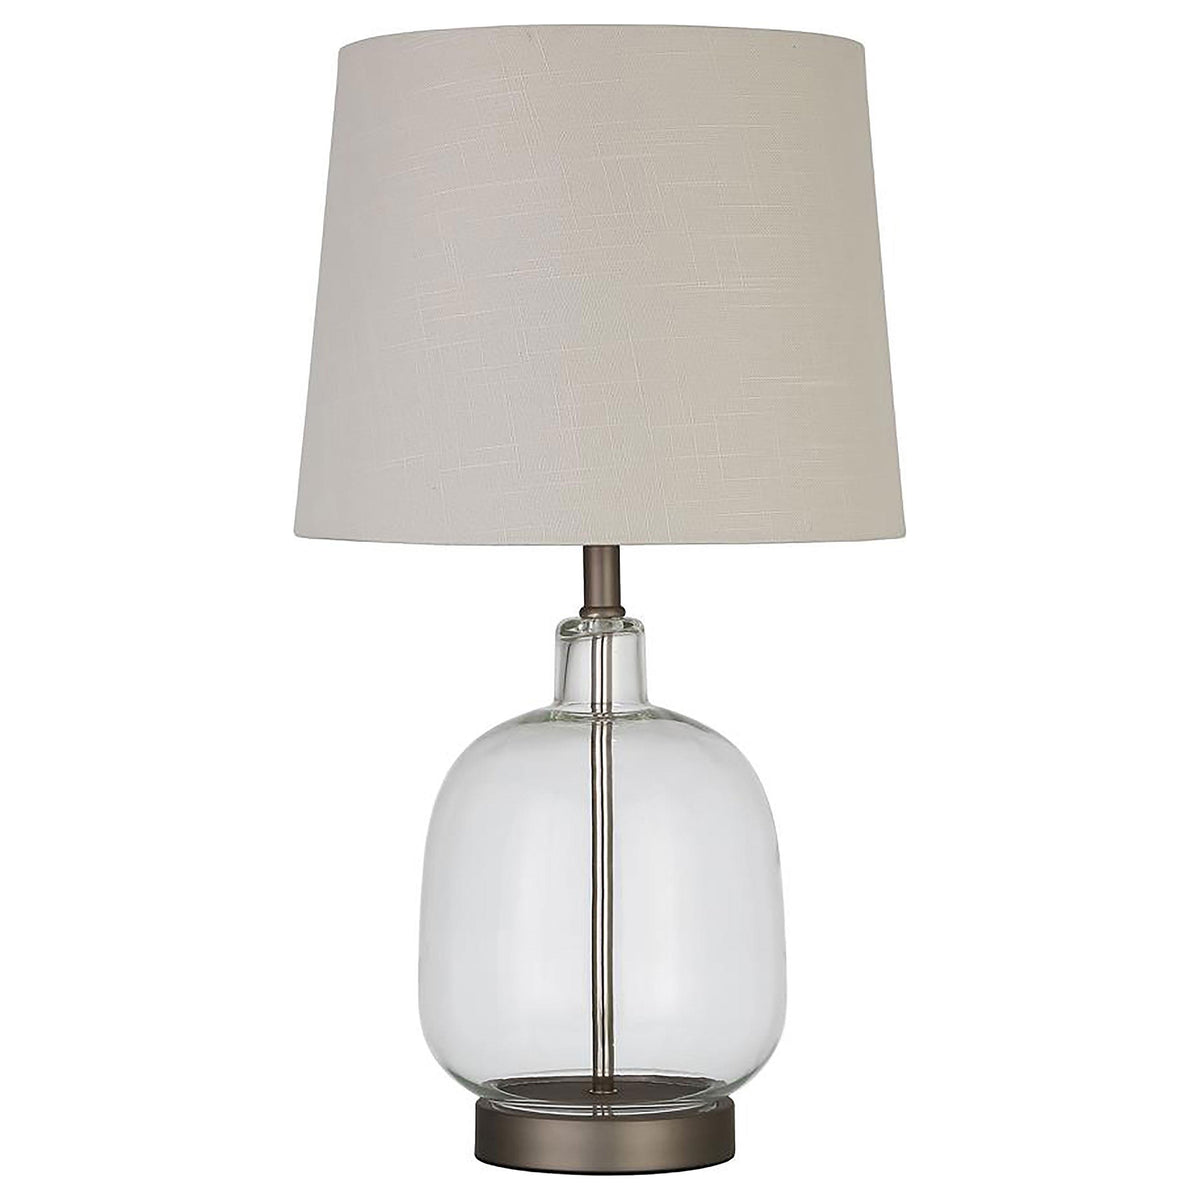 Costner Empire Table Lamp Beige and Clear  Las Vegas Furniture Stores